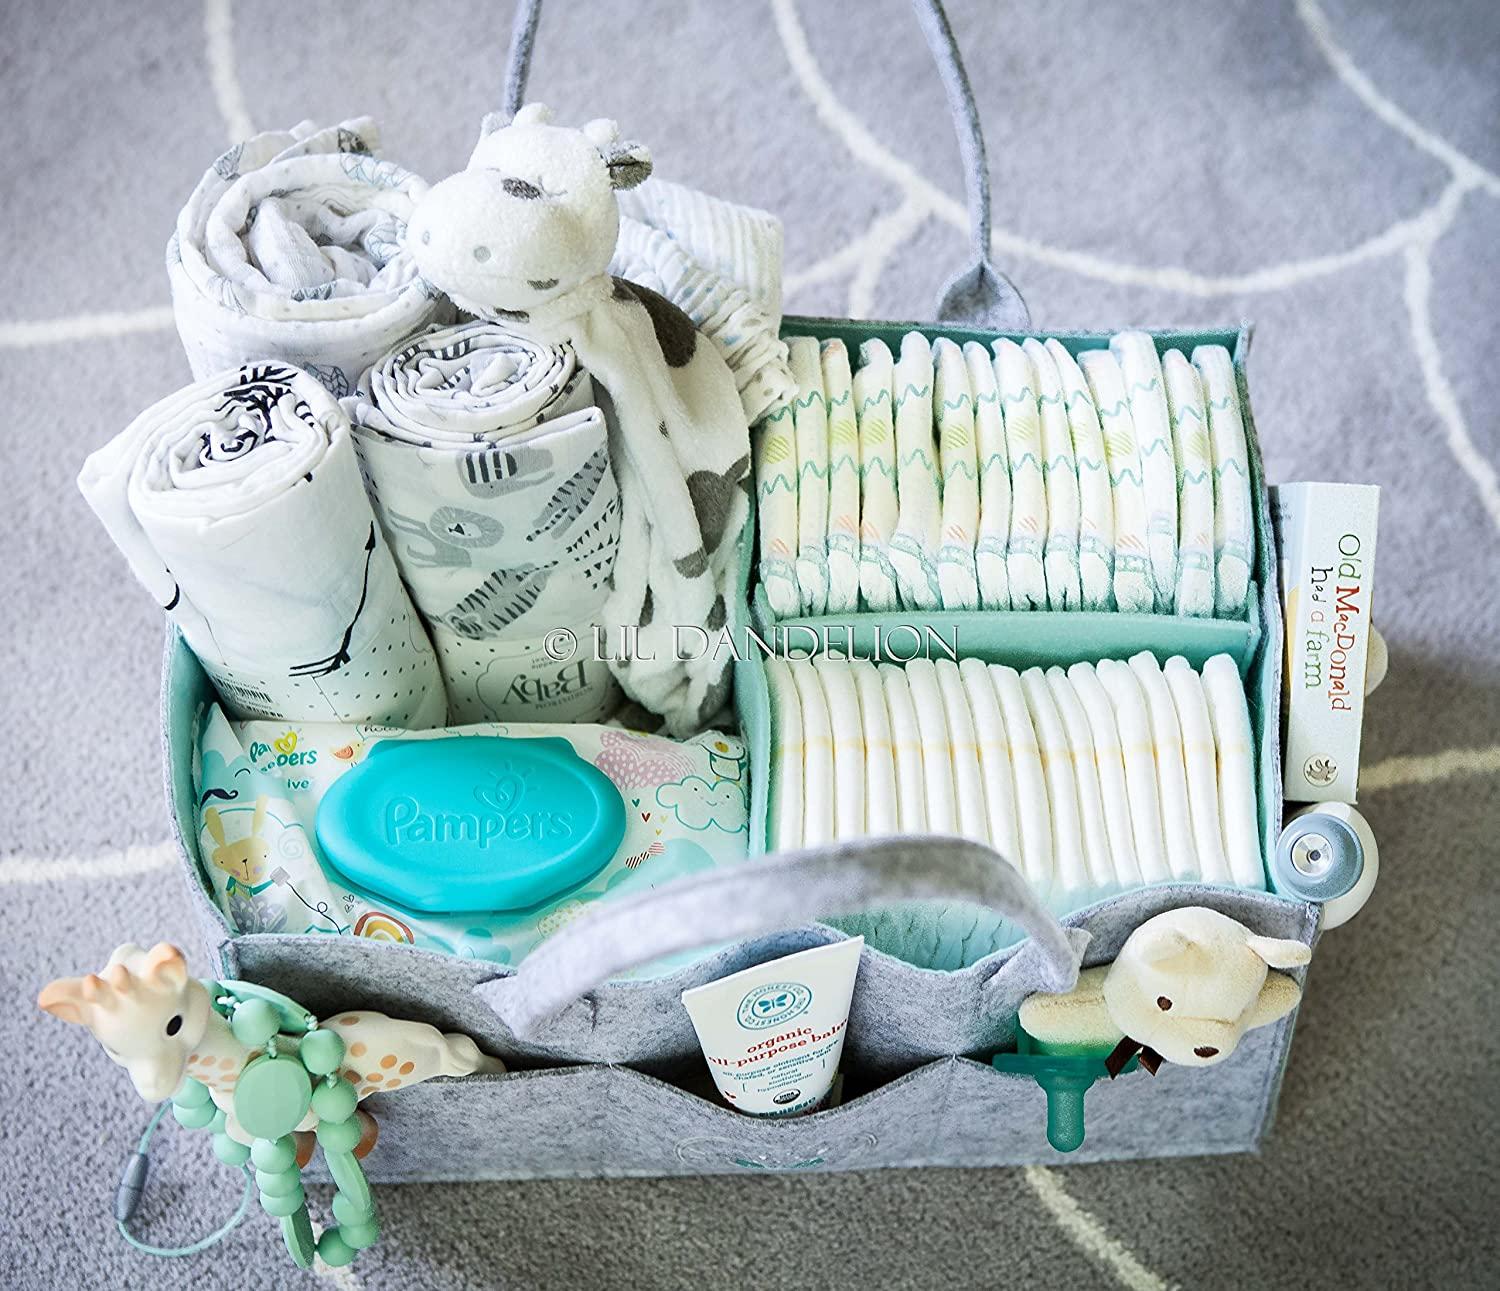 New Mom Gift Basket - Simplify Life With Your Newborn